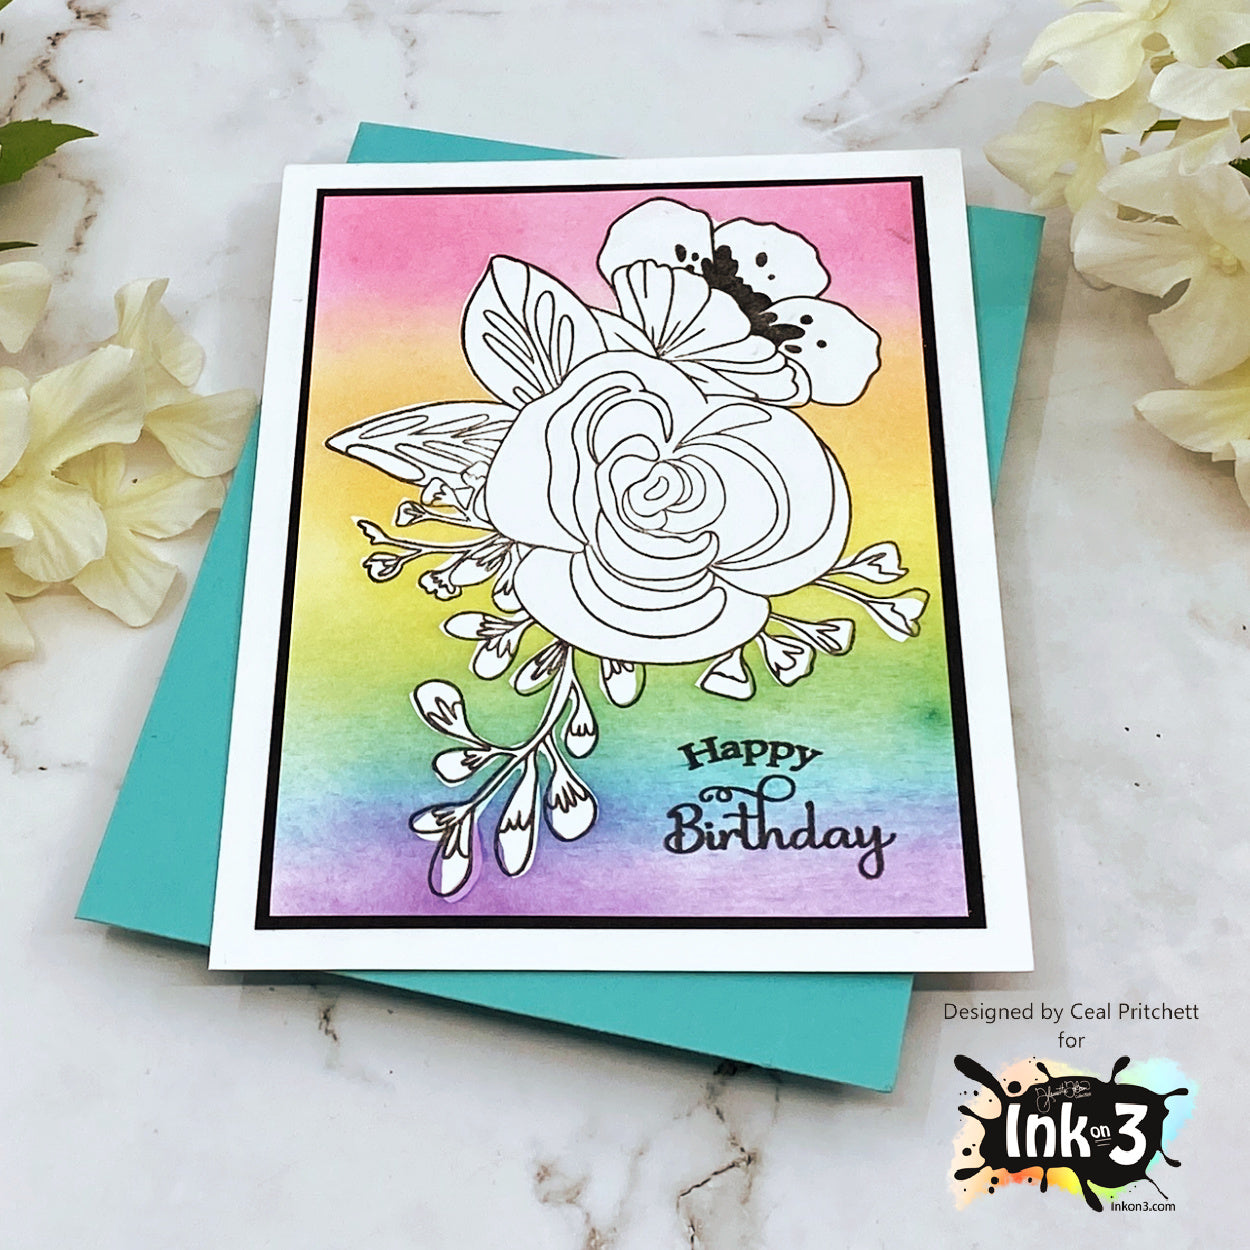 4-Piece Card Making Stamps Set - Wood Mounted Rubber Stamps for Card  Making, DIY Crafts, Scrapbooking - Happy Birthday, Thank You,  Congratulations